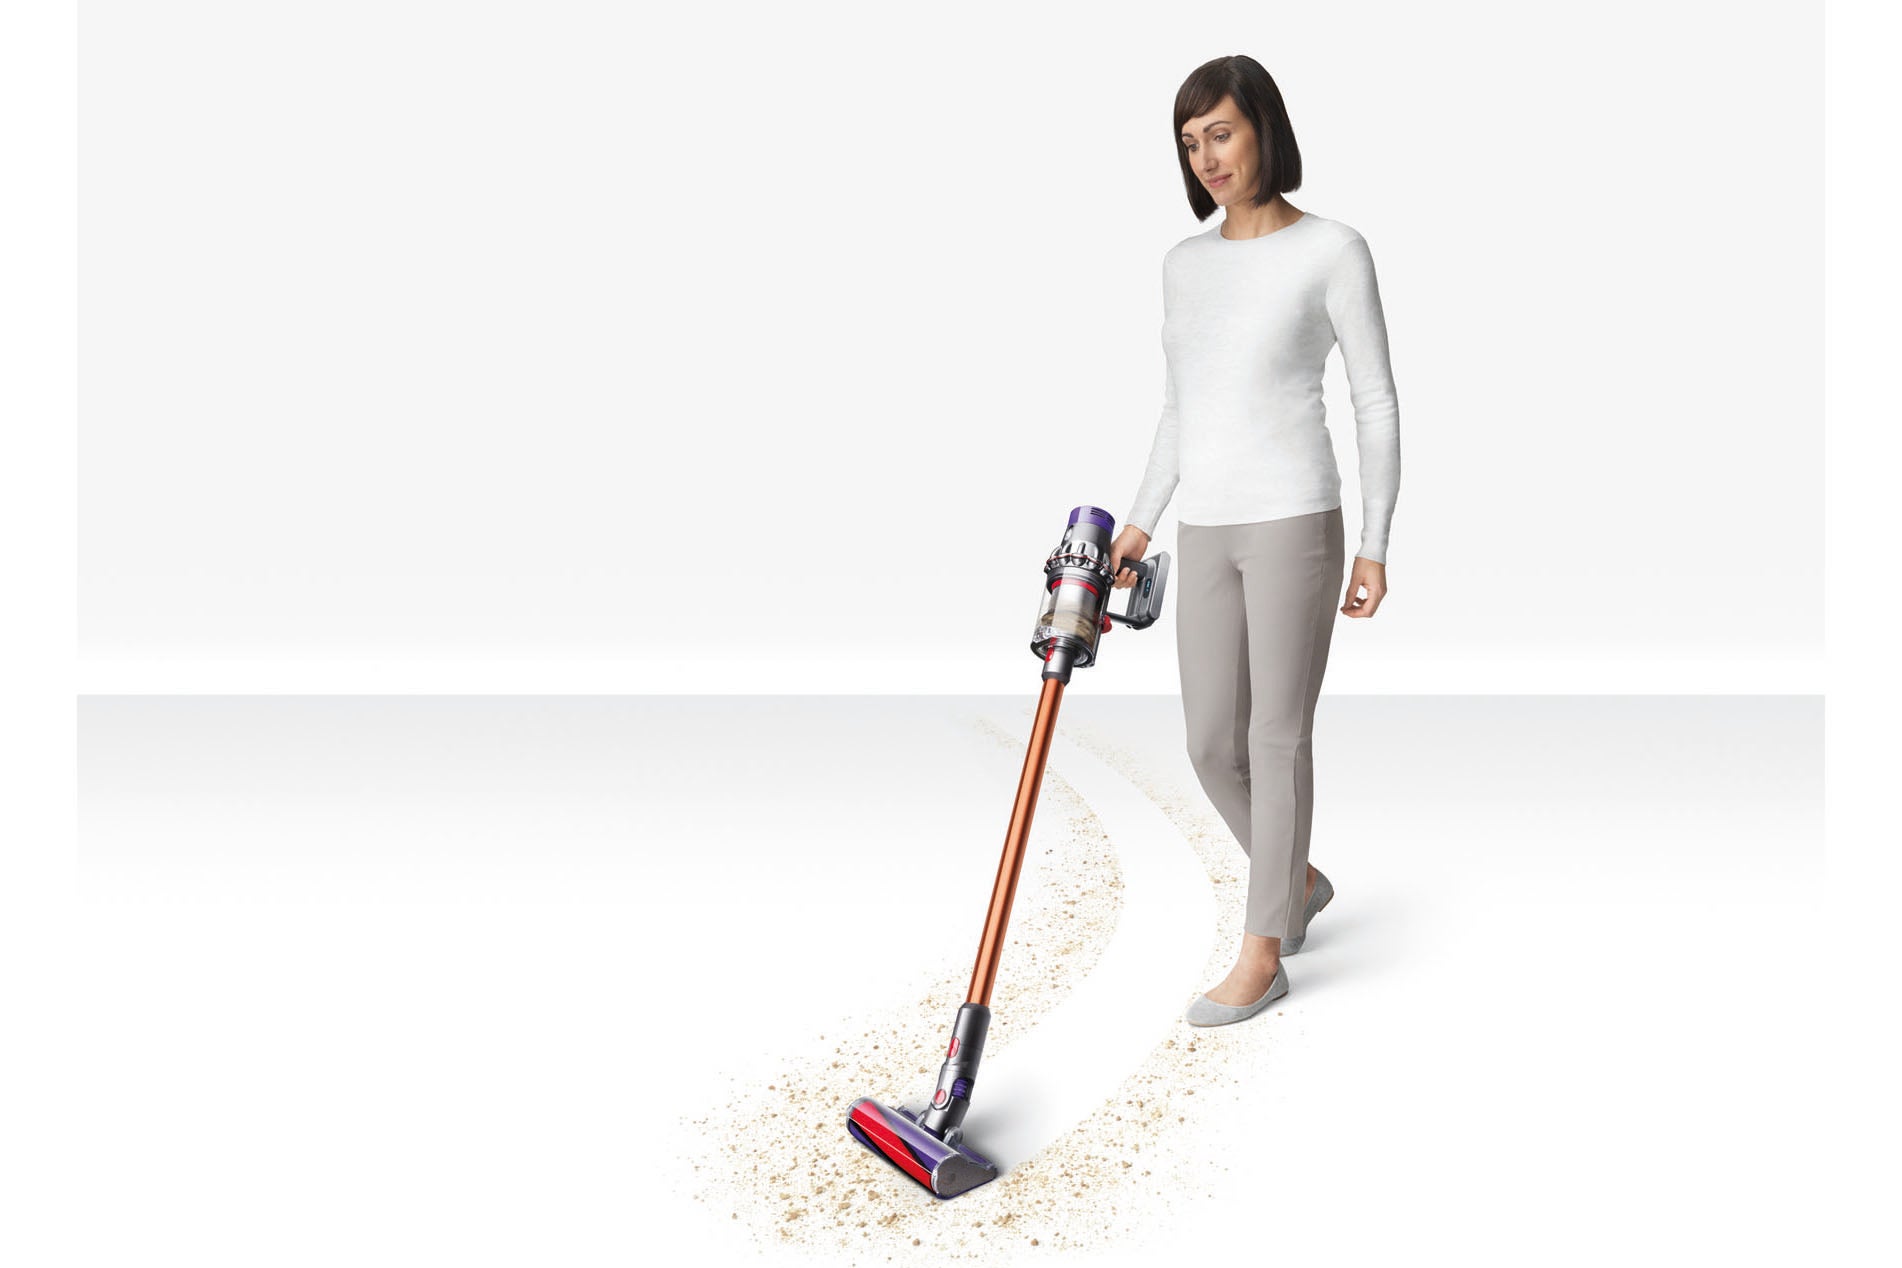 Vegetables pine tree toothache New Dyson Vacuums 2018: Meet the cordless Cyclone V10 family